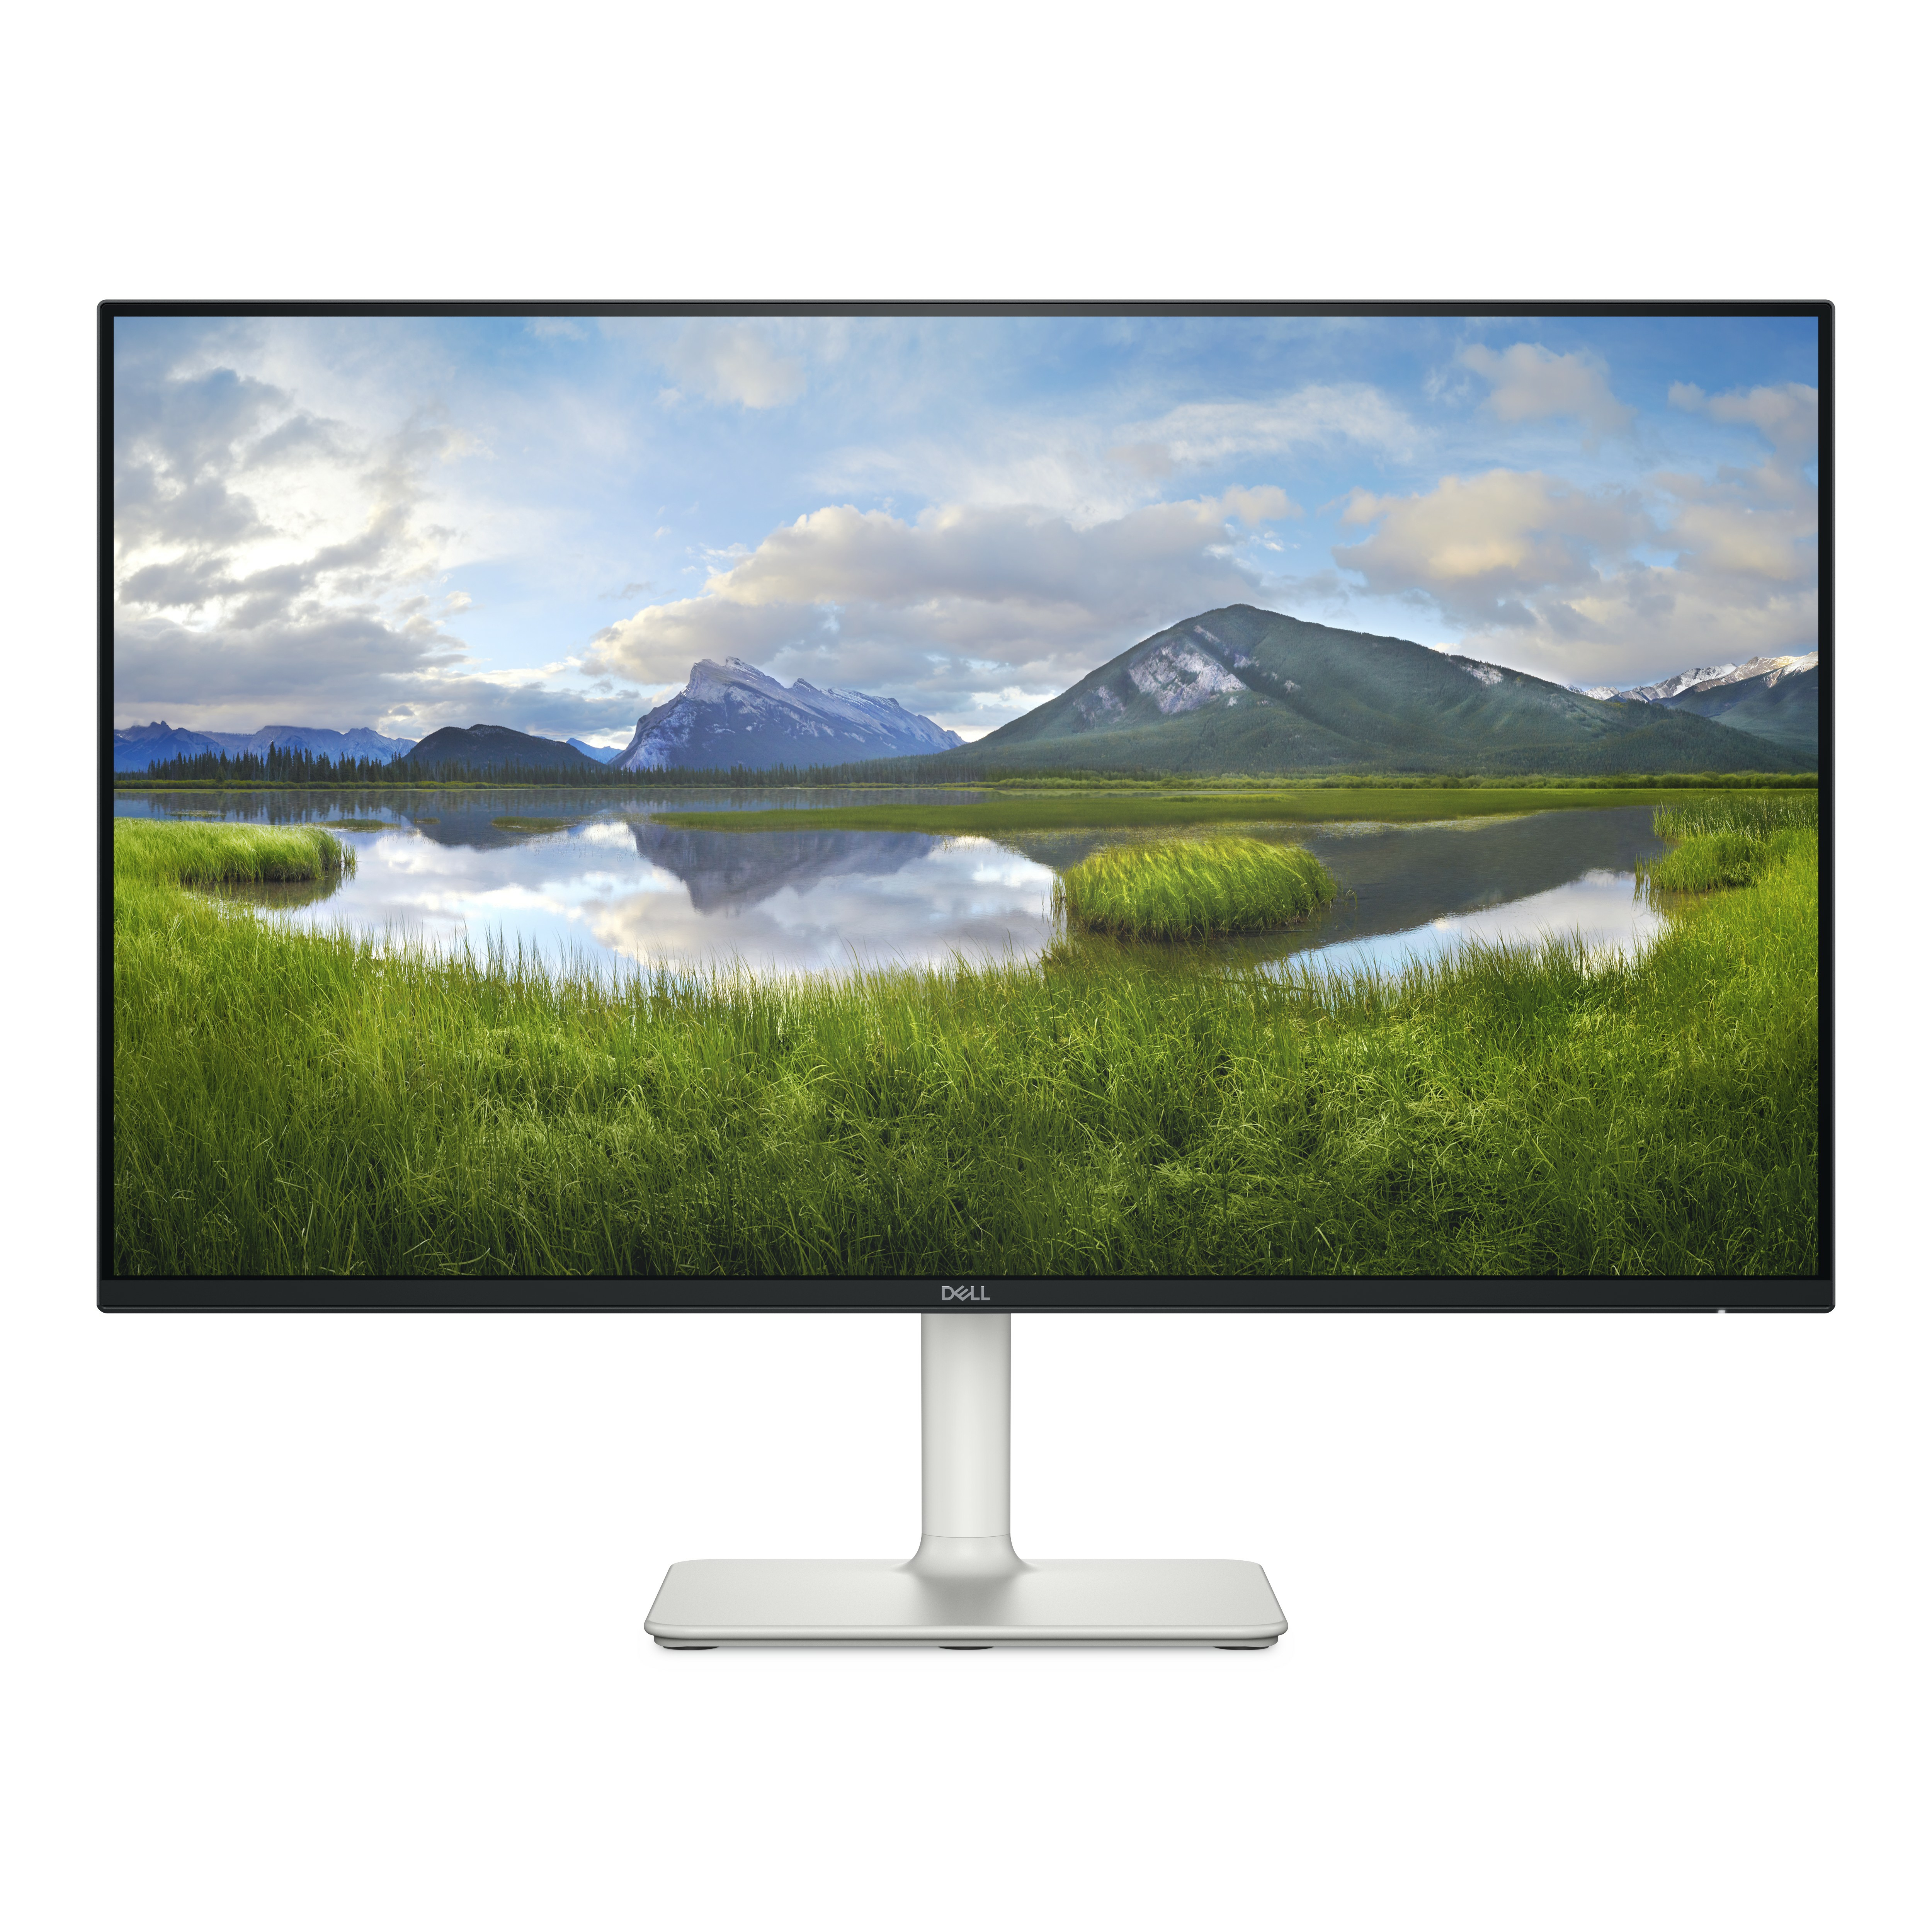 DELL S Series S2425H LED display